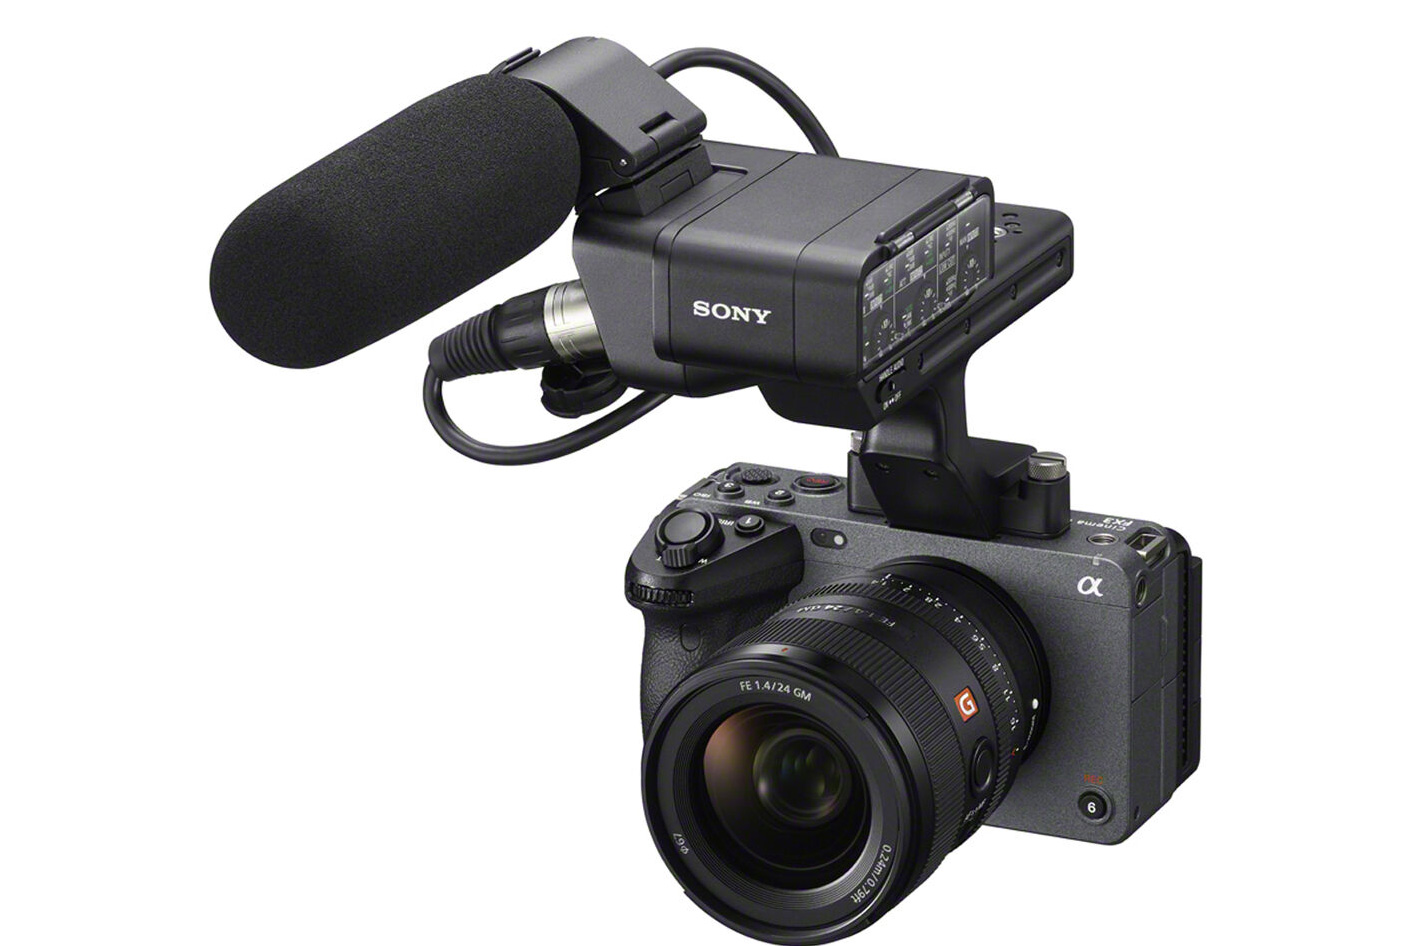 Sony FX3: update adds log modes, LUT import and timecode sync